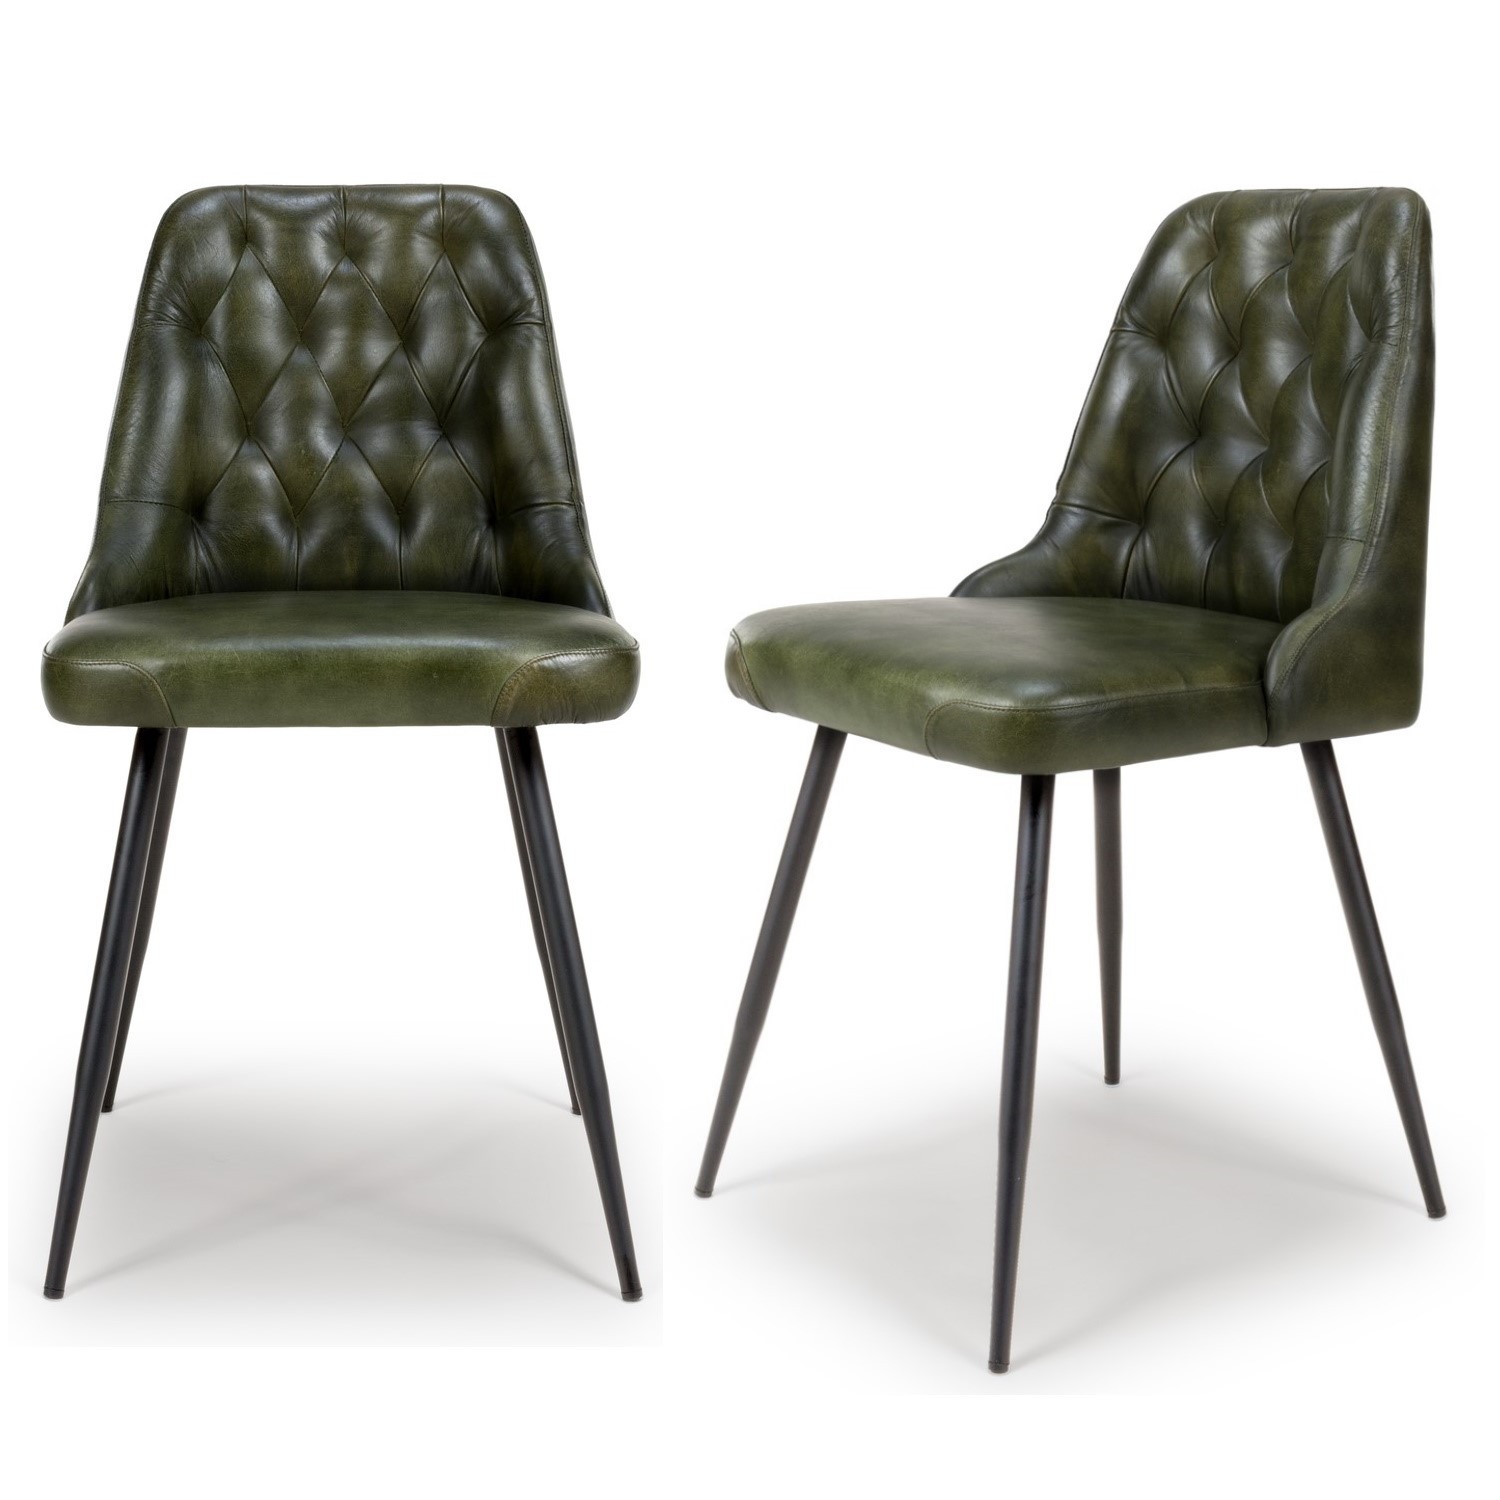 Photo of Set of 2 real leather green dining chair with quilted back - jaxson